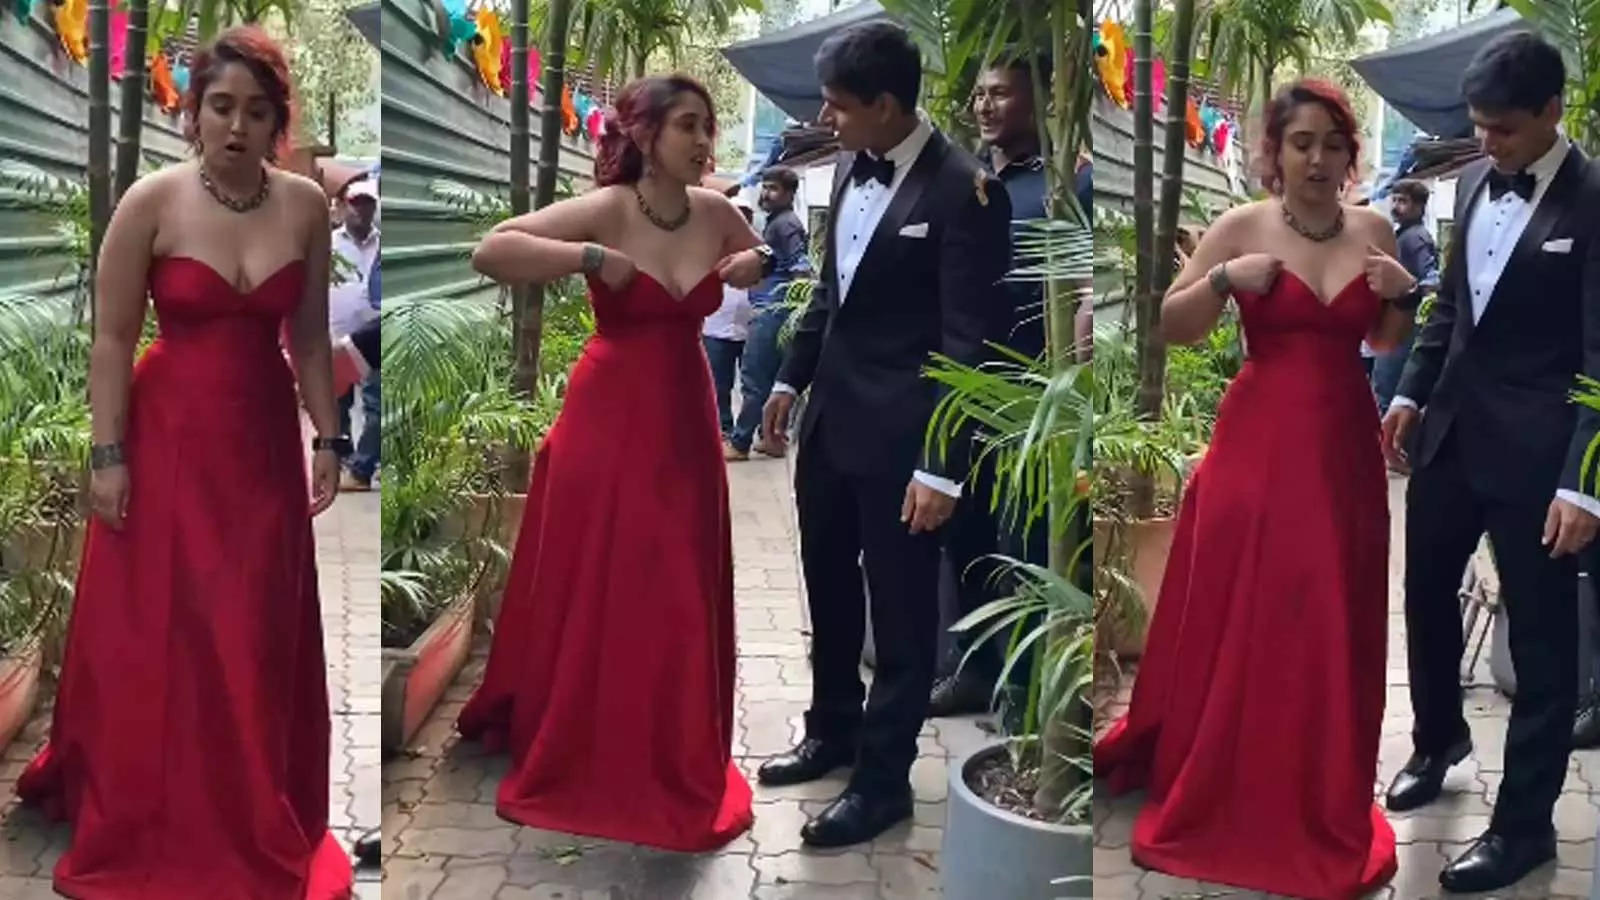 Aamir Khan's daughter Ira Khan brutally trolled for adjusting her 'uncomfortable' dress at engagement party, netizens call her 'vulgar' | Hindi Movie News - Bollywood - Times of India